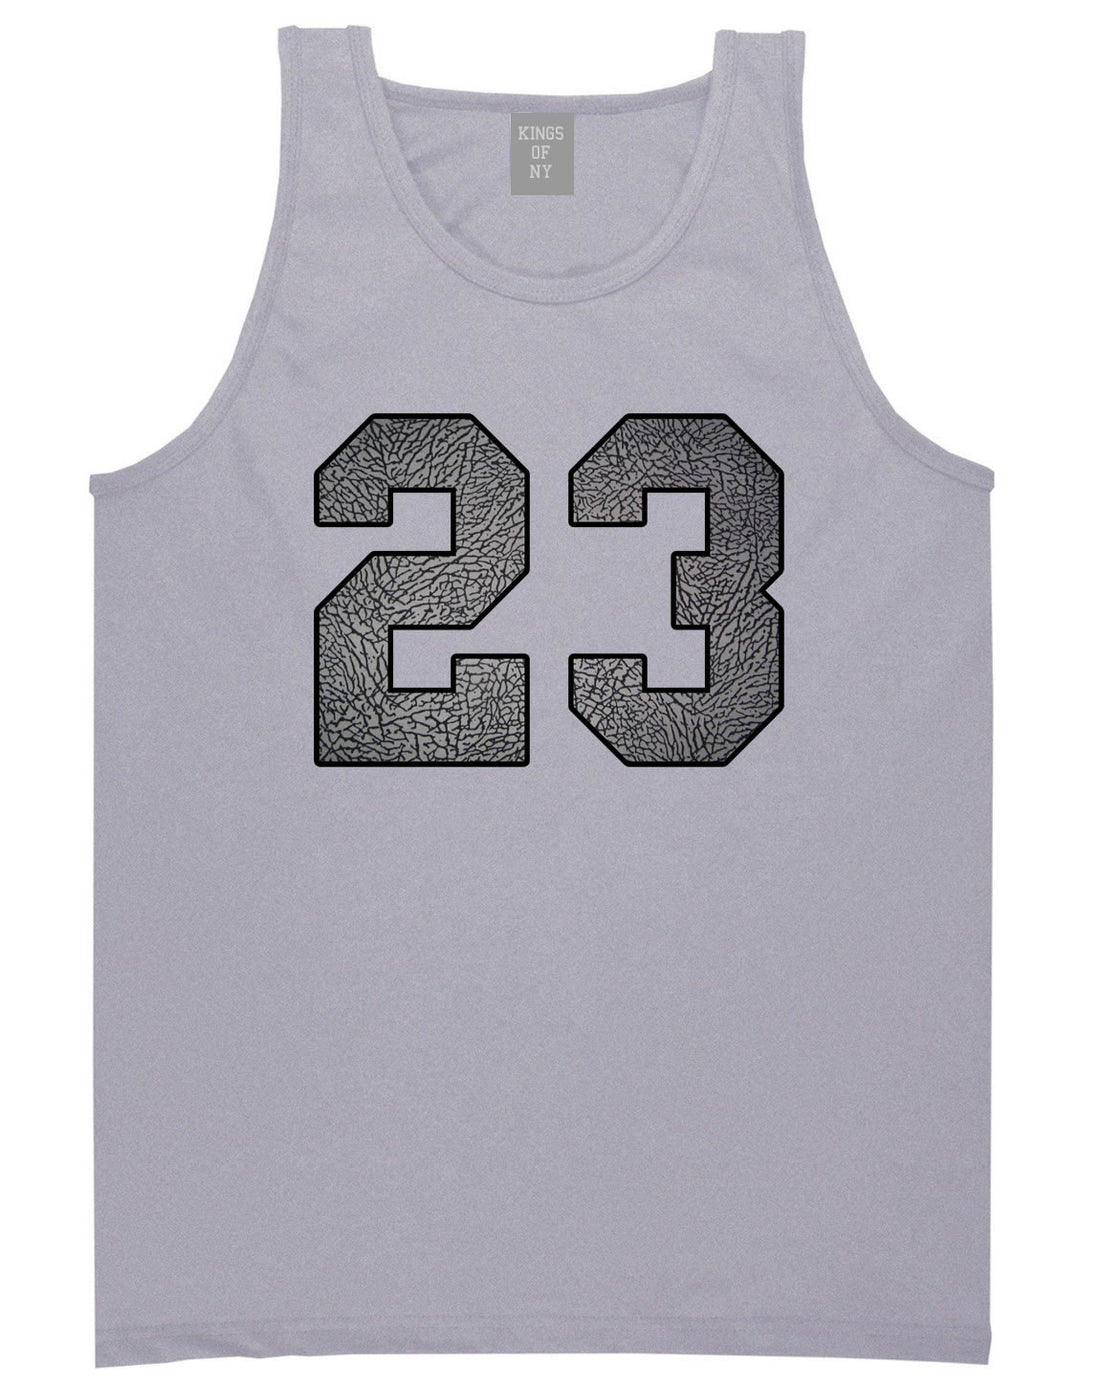 23 Cement Jersey Tank Top in Grey By Kings Of NY